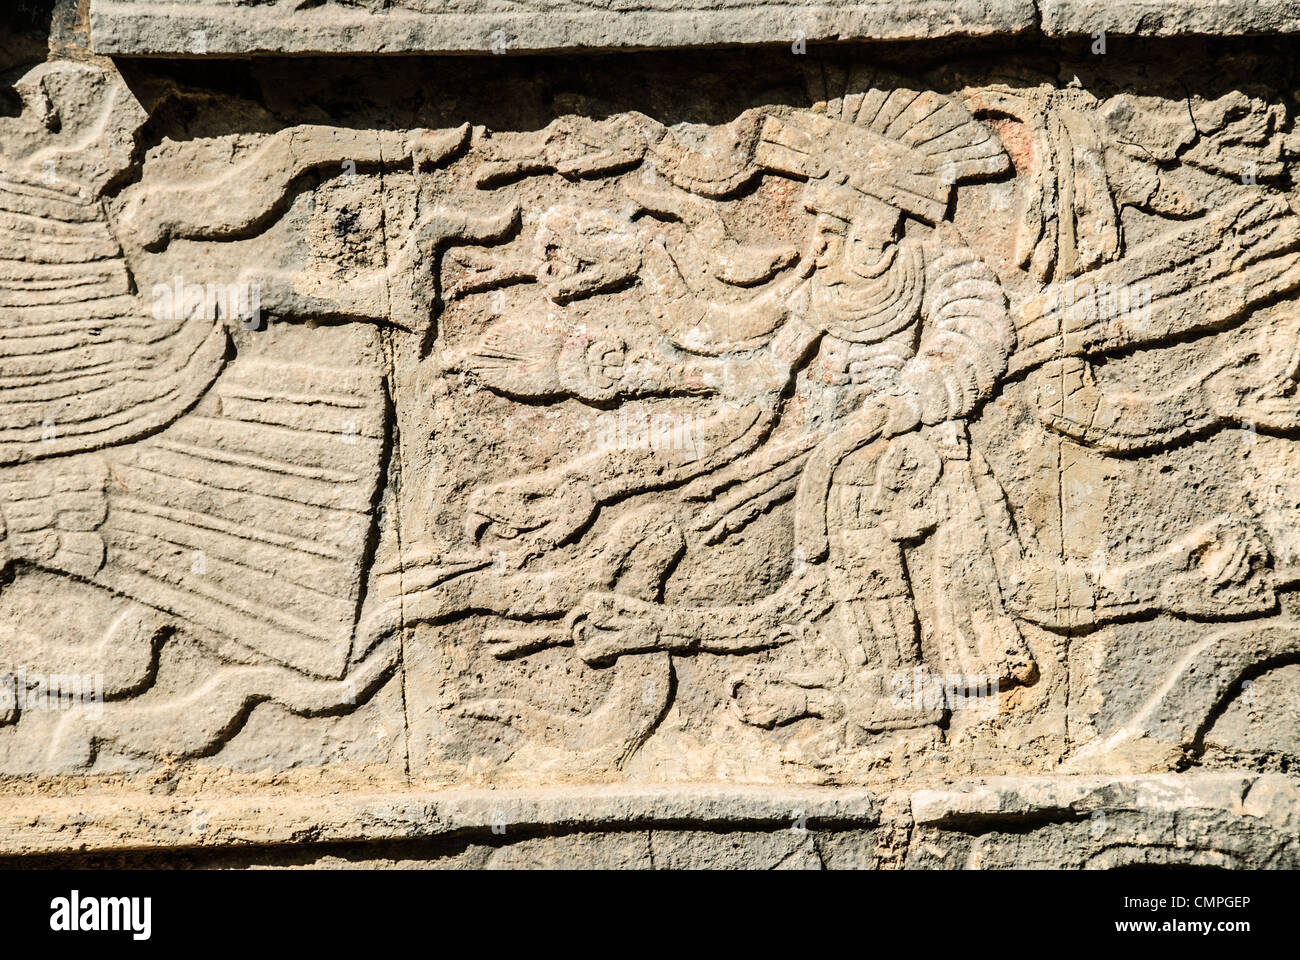 CHICHEN ITZA, Mexico - A carving in a stone wall depicting a Mayan warrior at Chichen Itza, Mexico. Stock Photo